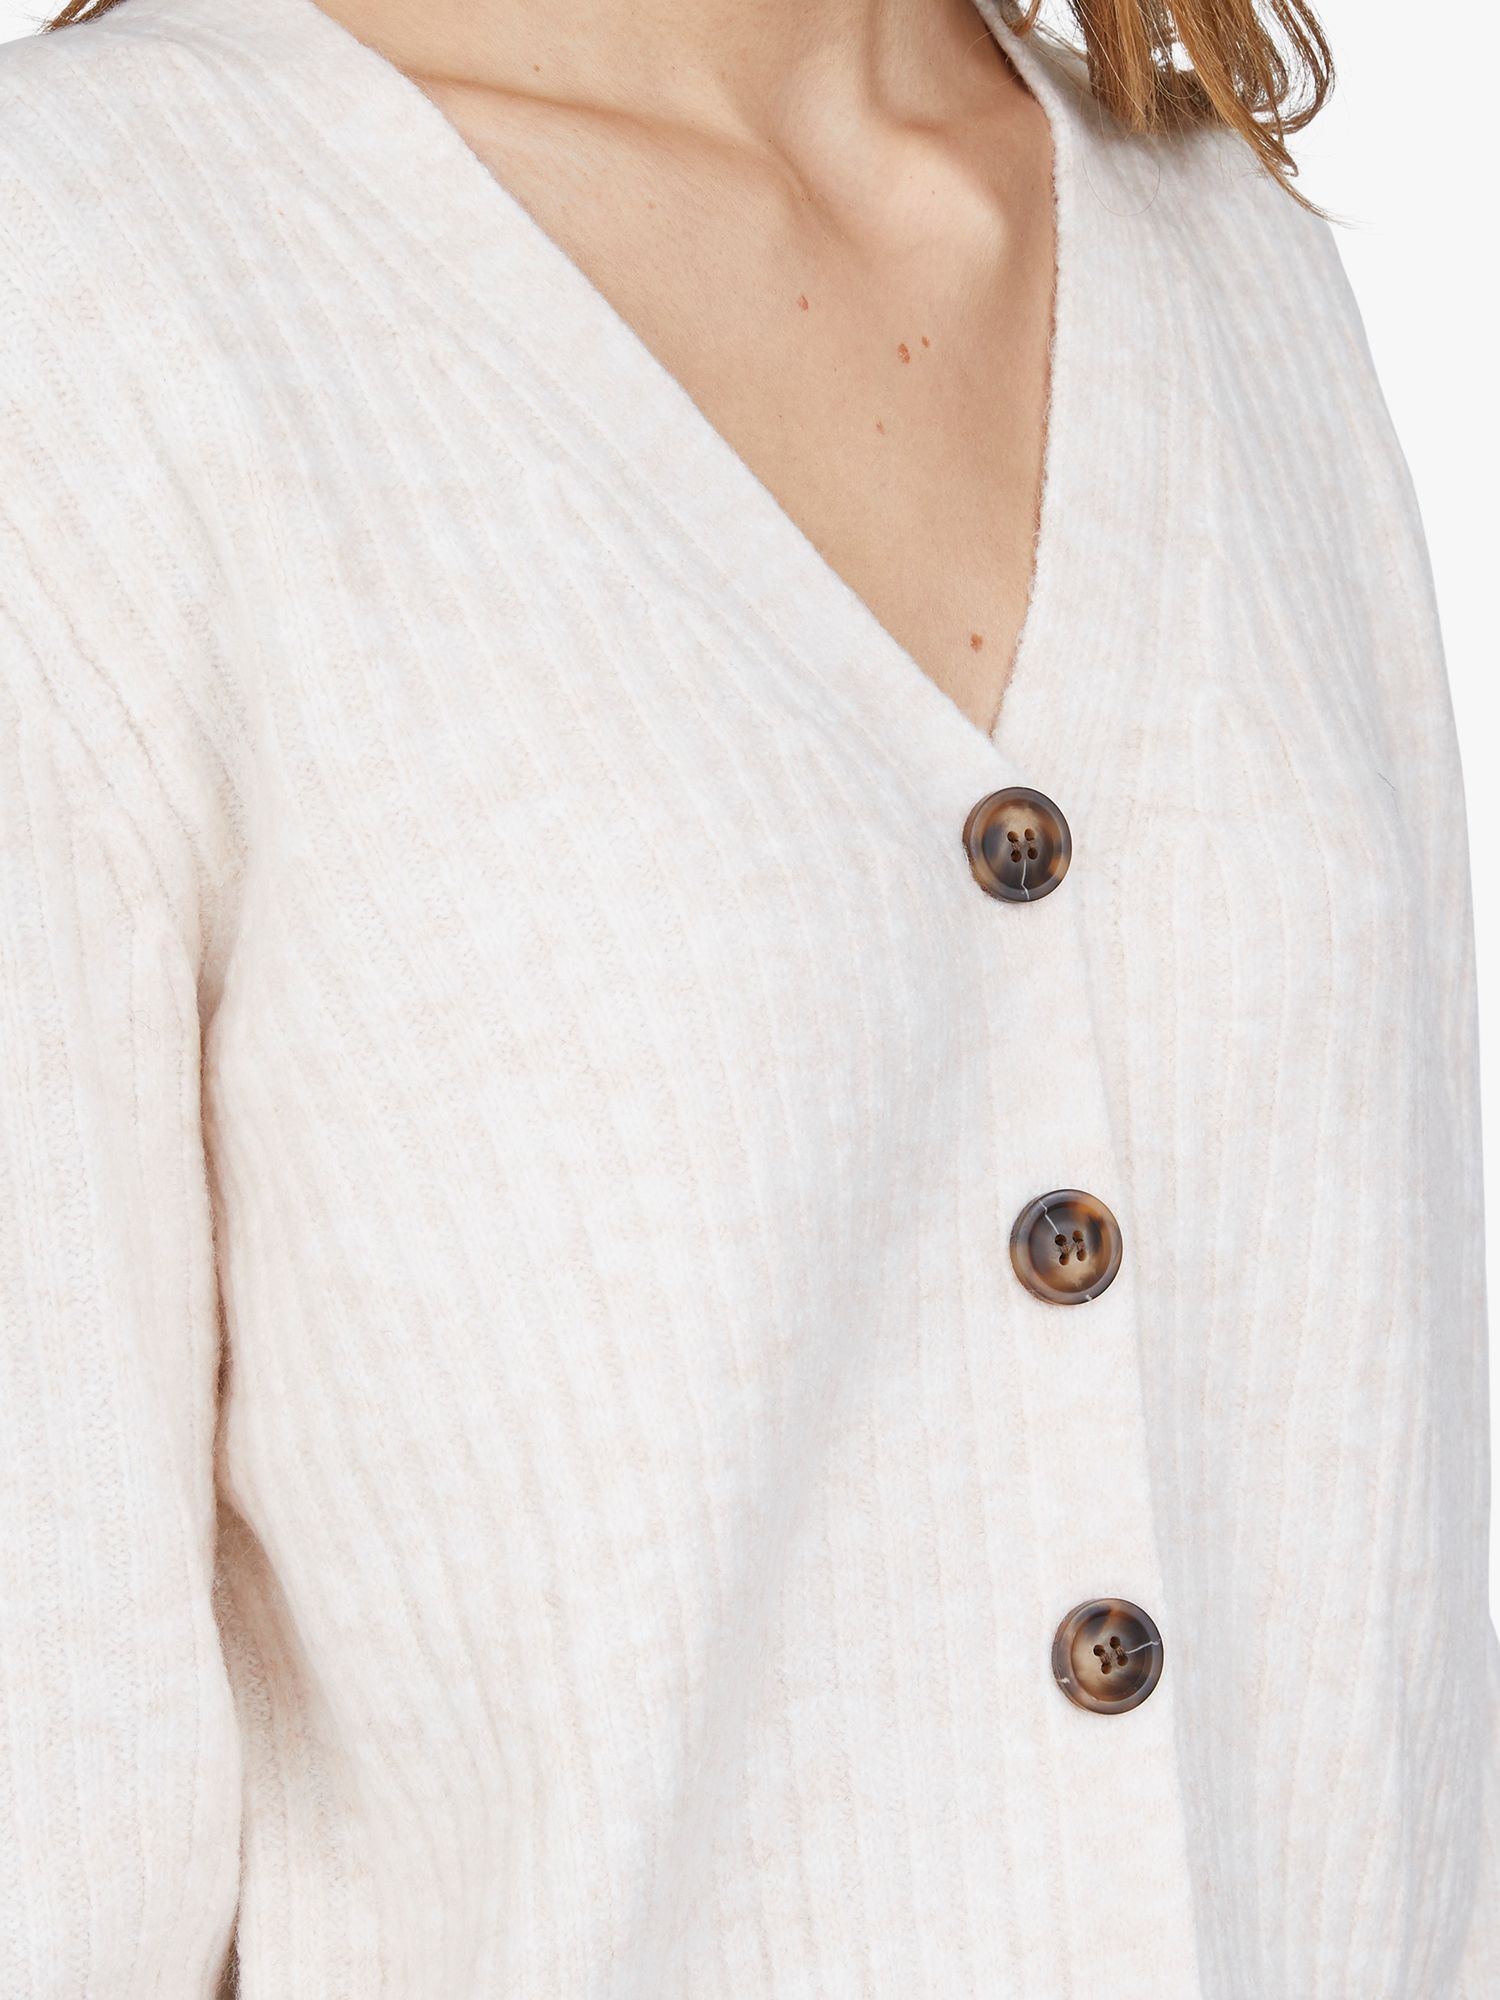 Buy Sisters Point Lexa Ribbed Knitted Cardigan, Powder Mel Online at johnlewis.com